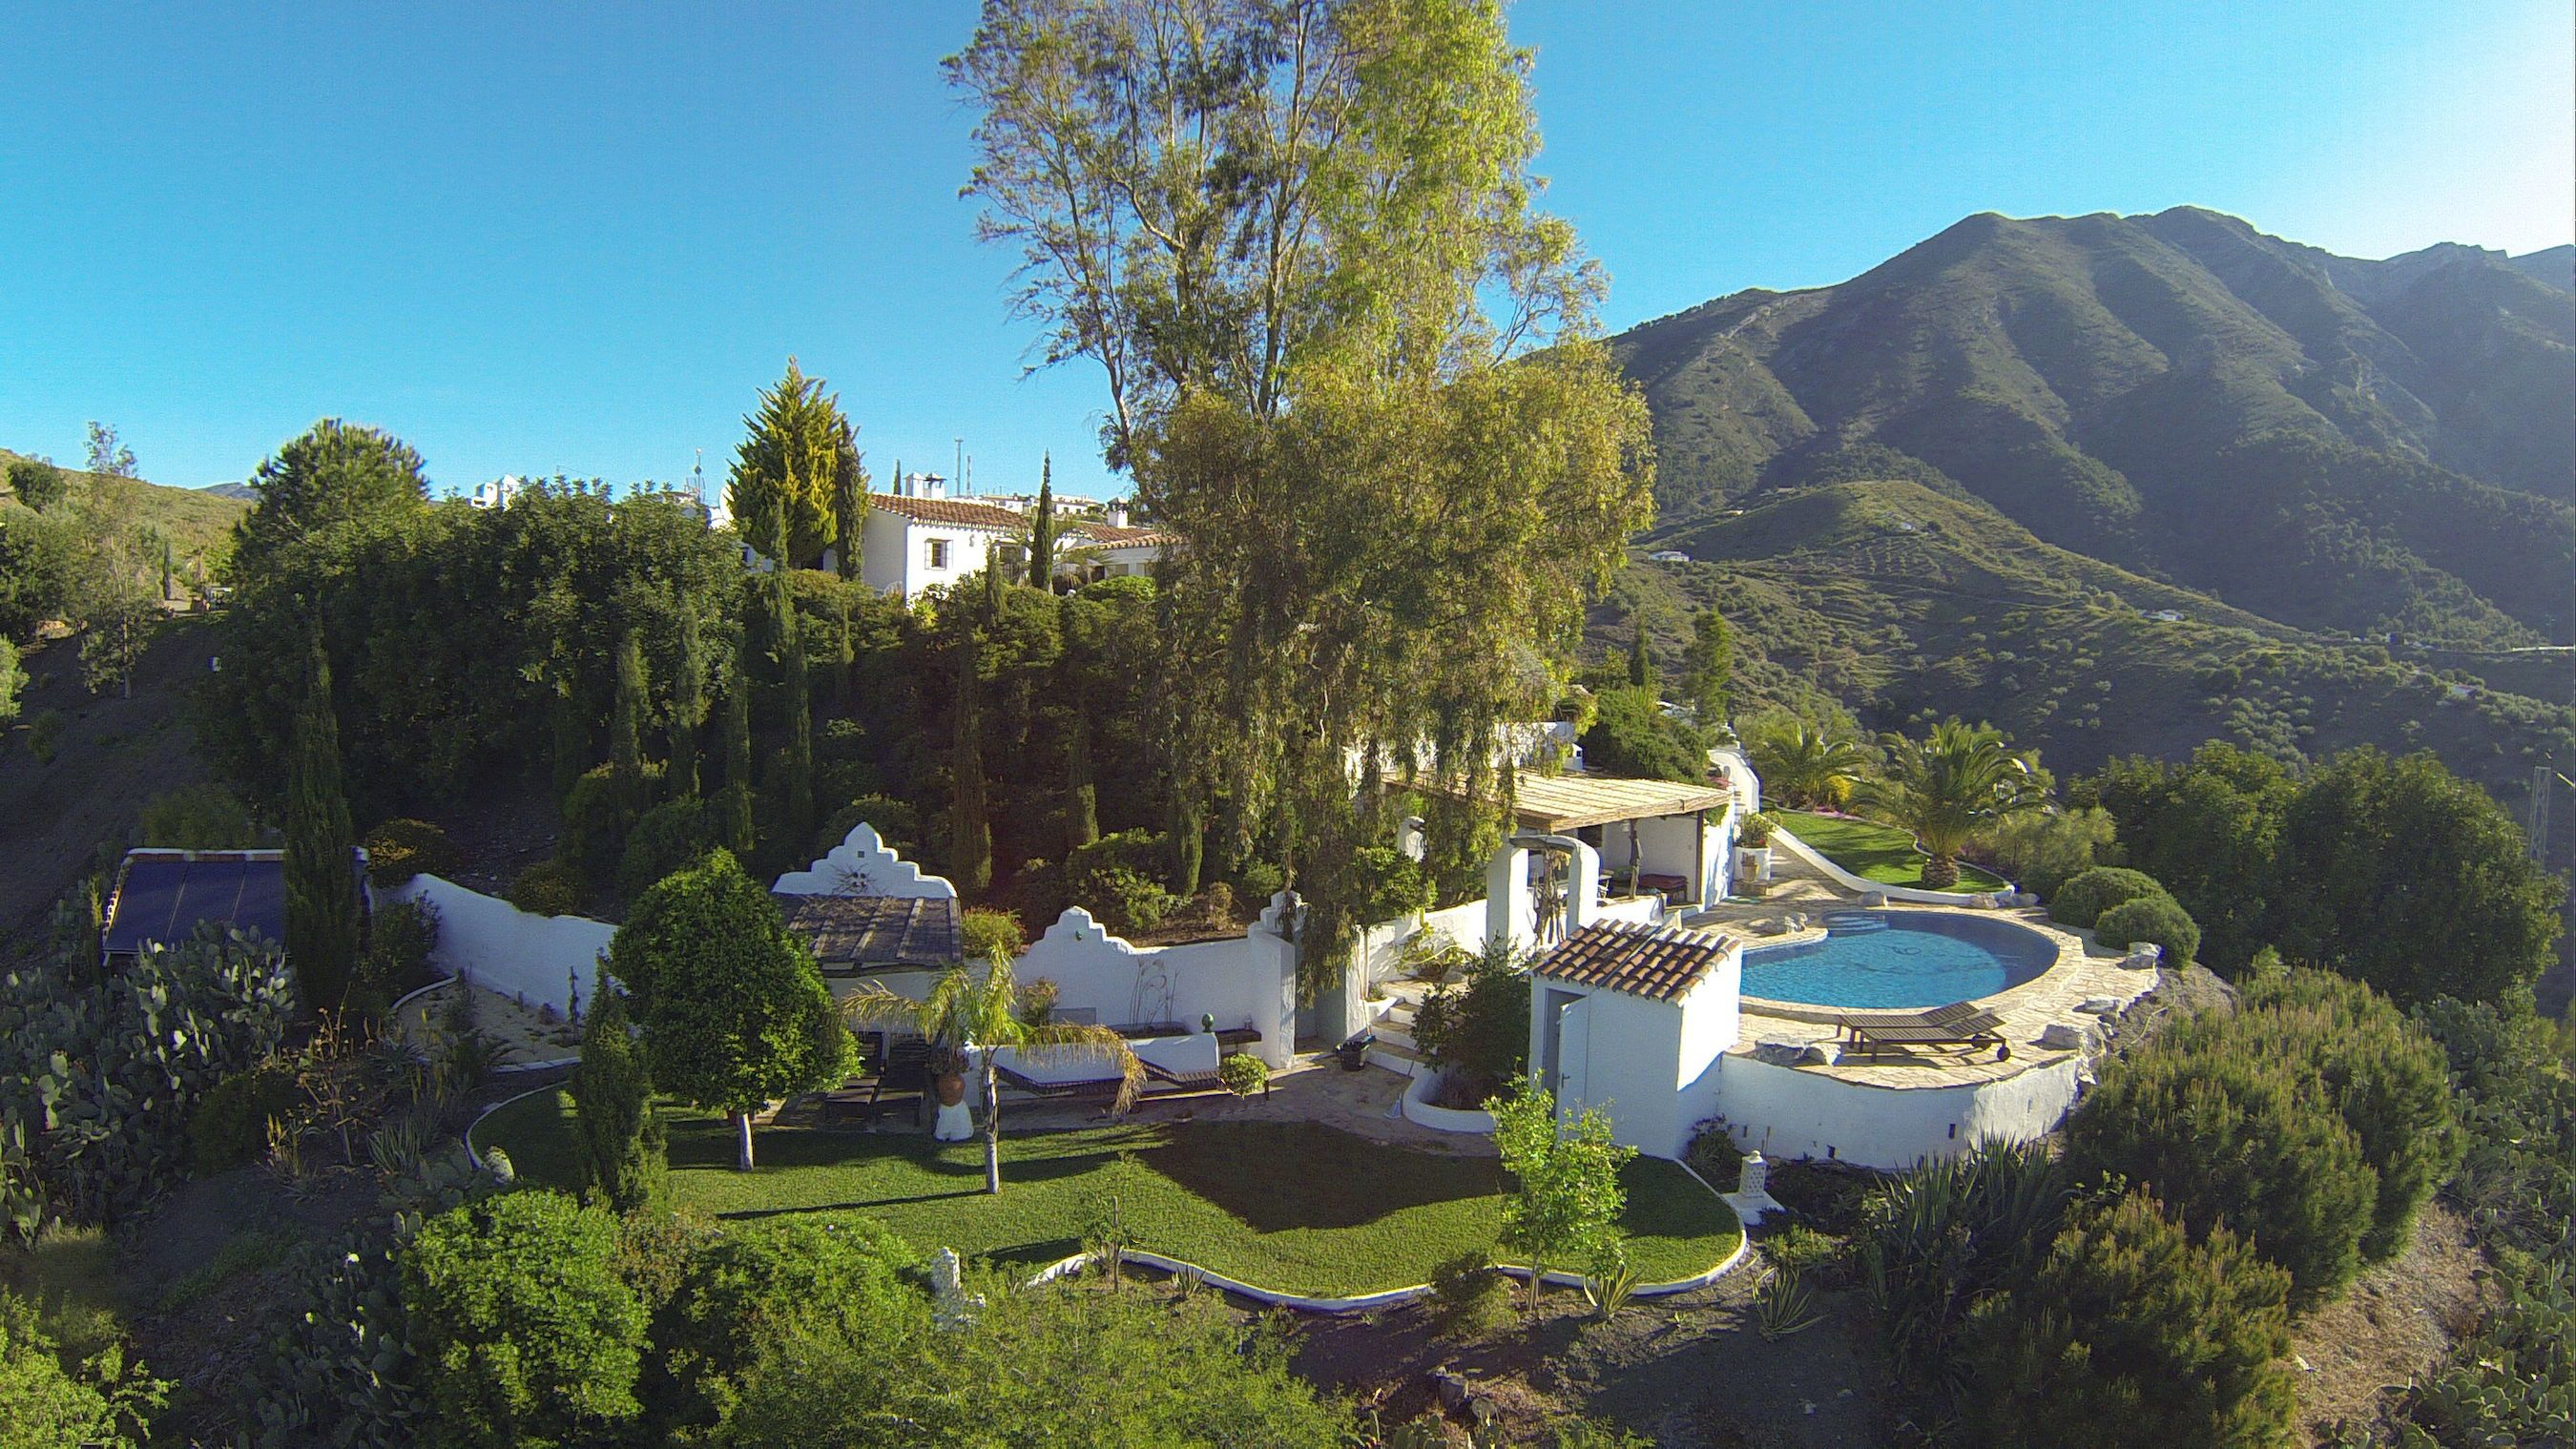 The exteriors and grounds of El Cortijo, Andalucia